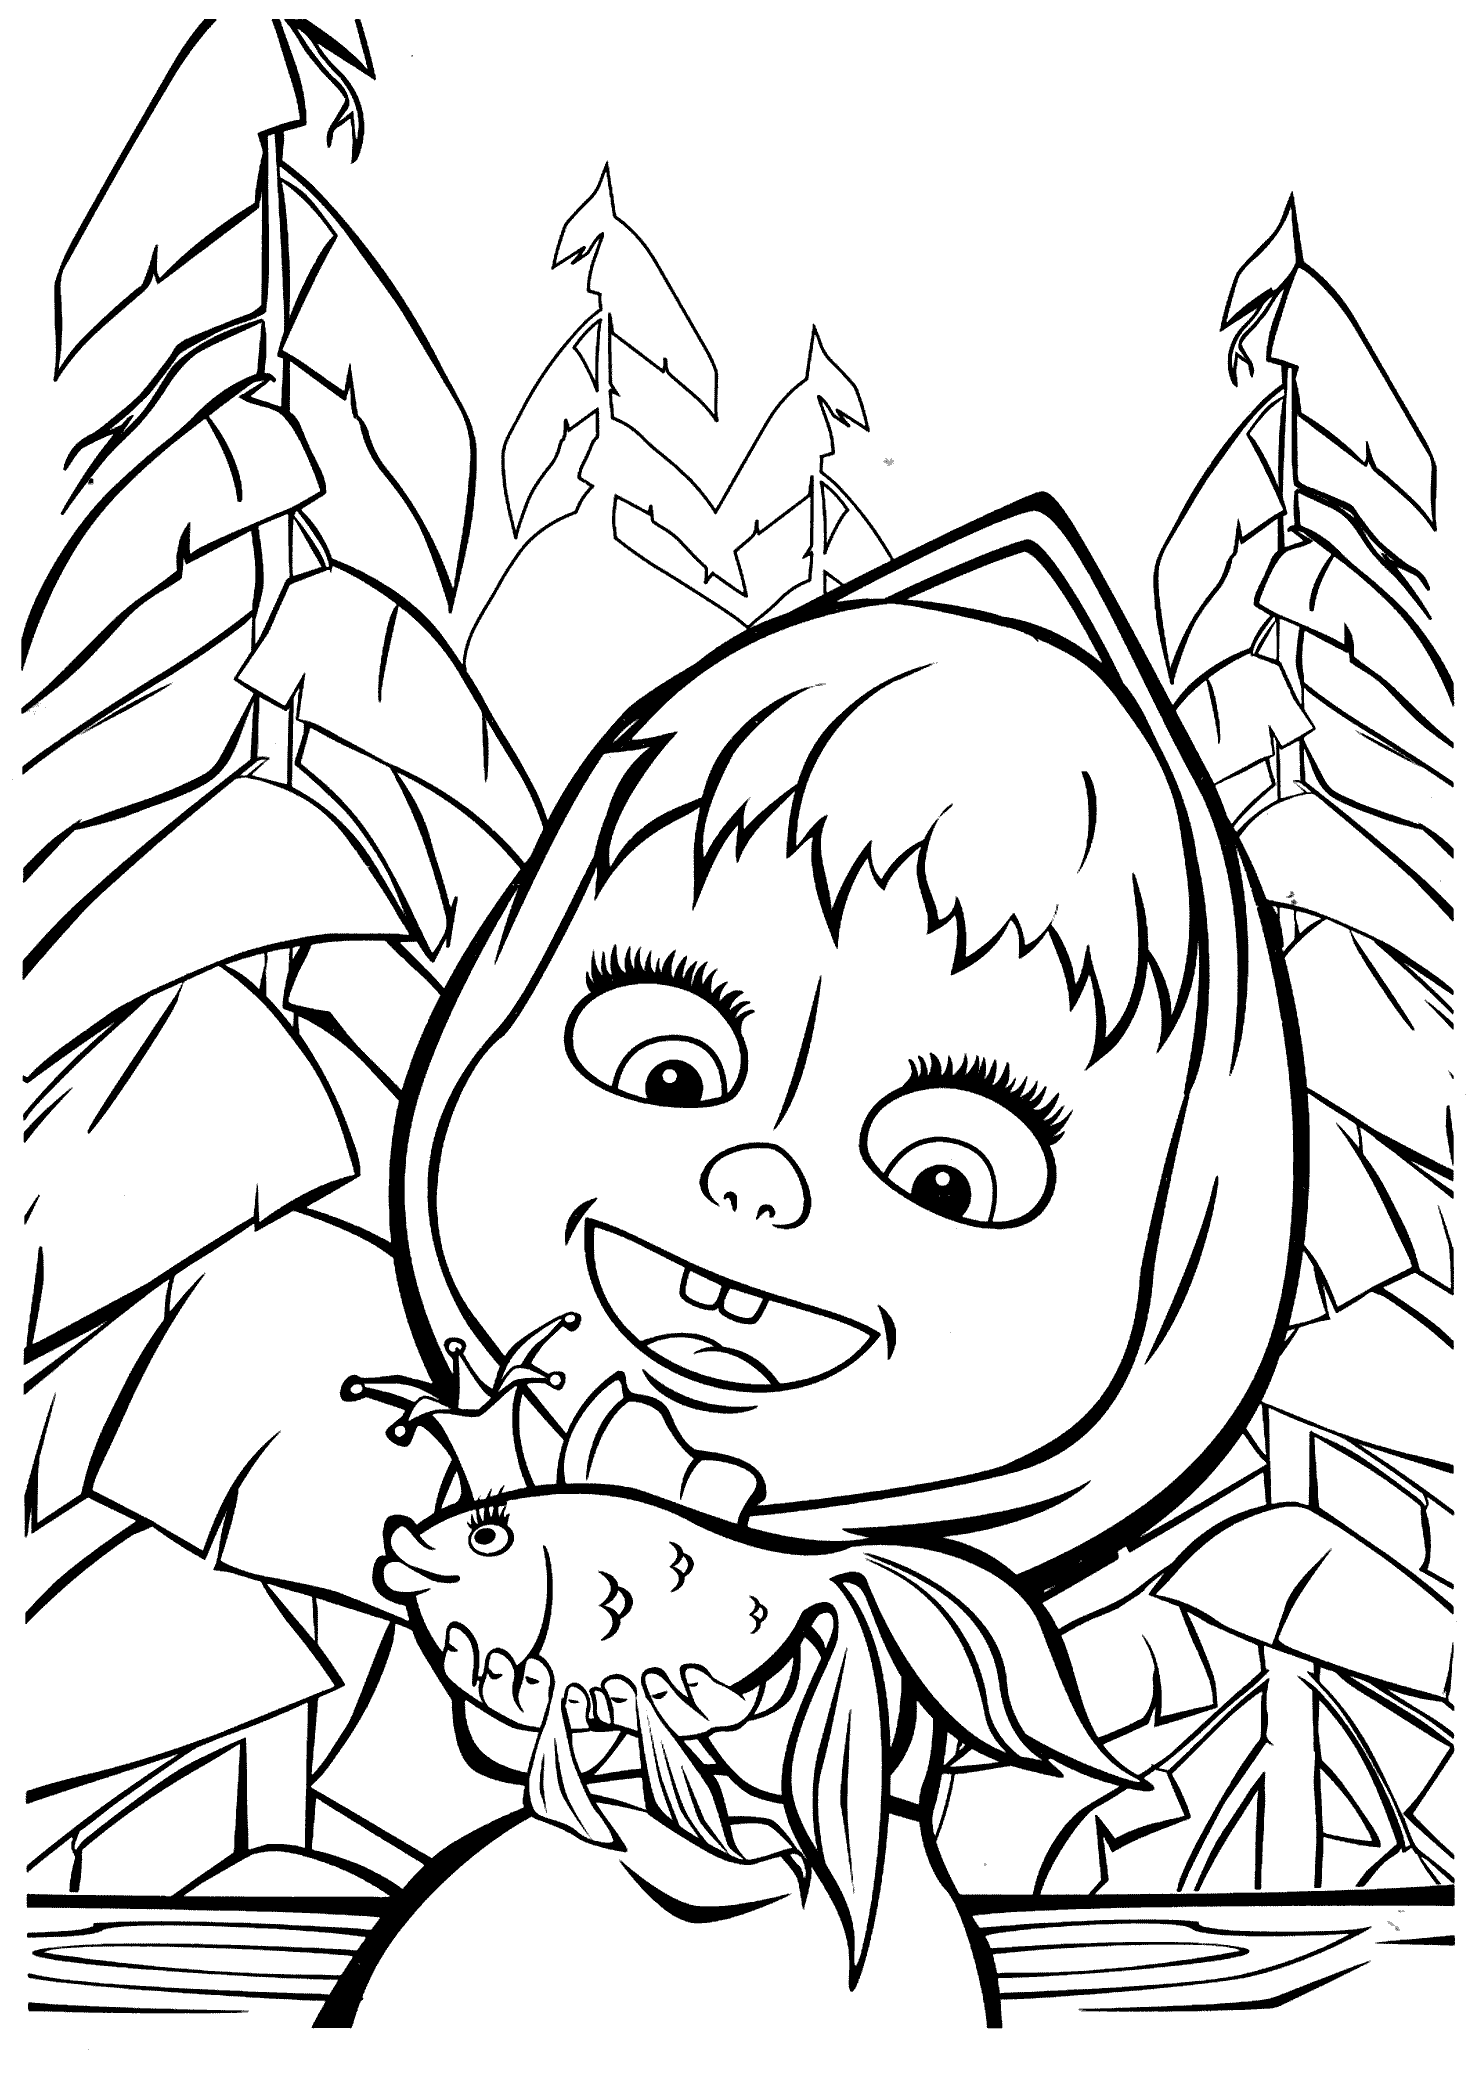 masha-and-the-bear coloring pages,printable,coloring pages